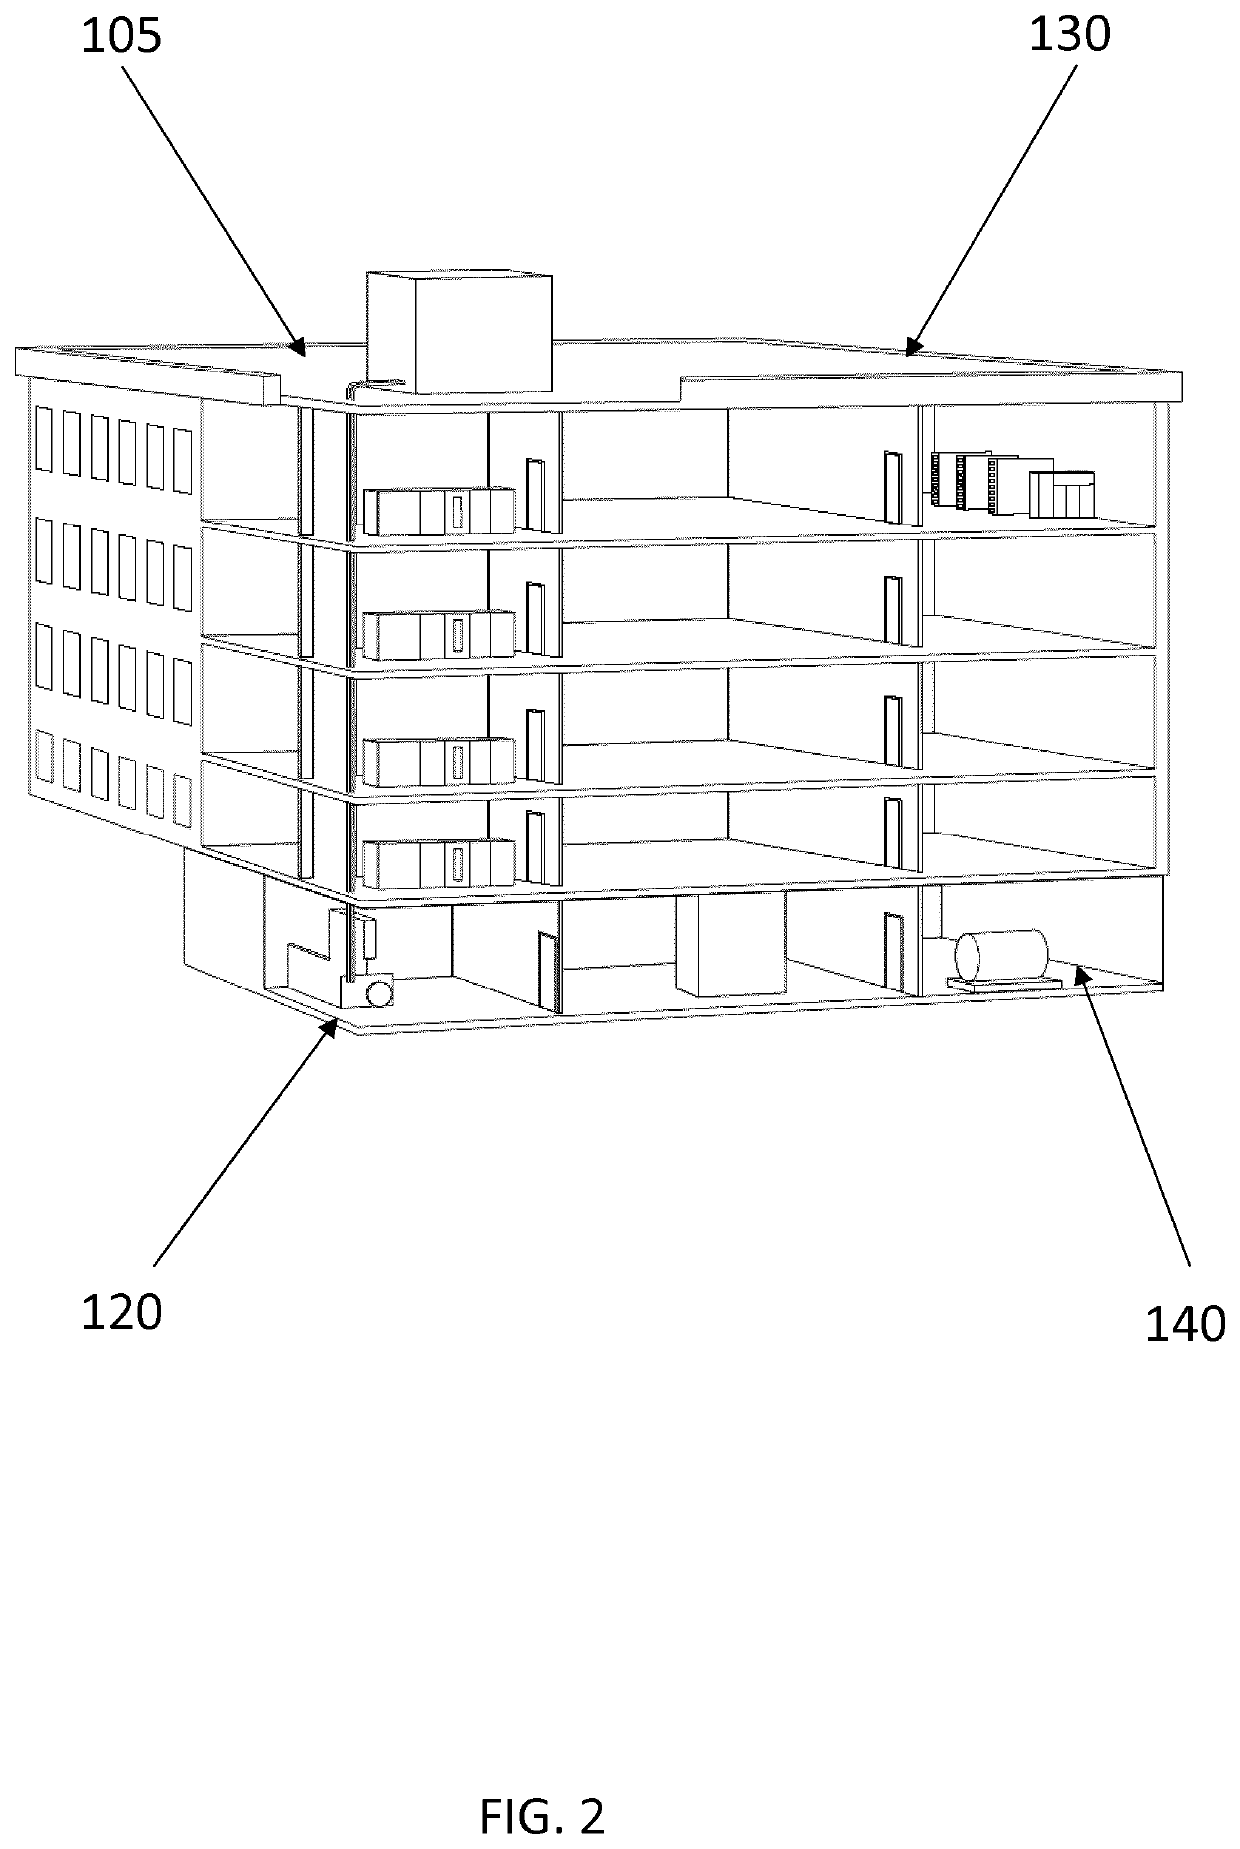 Systems and methods of optimizing HVAC control in a building or network of buildings